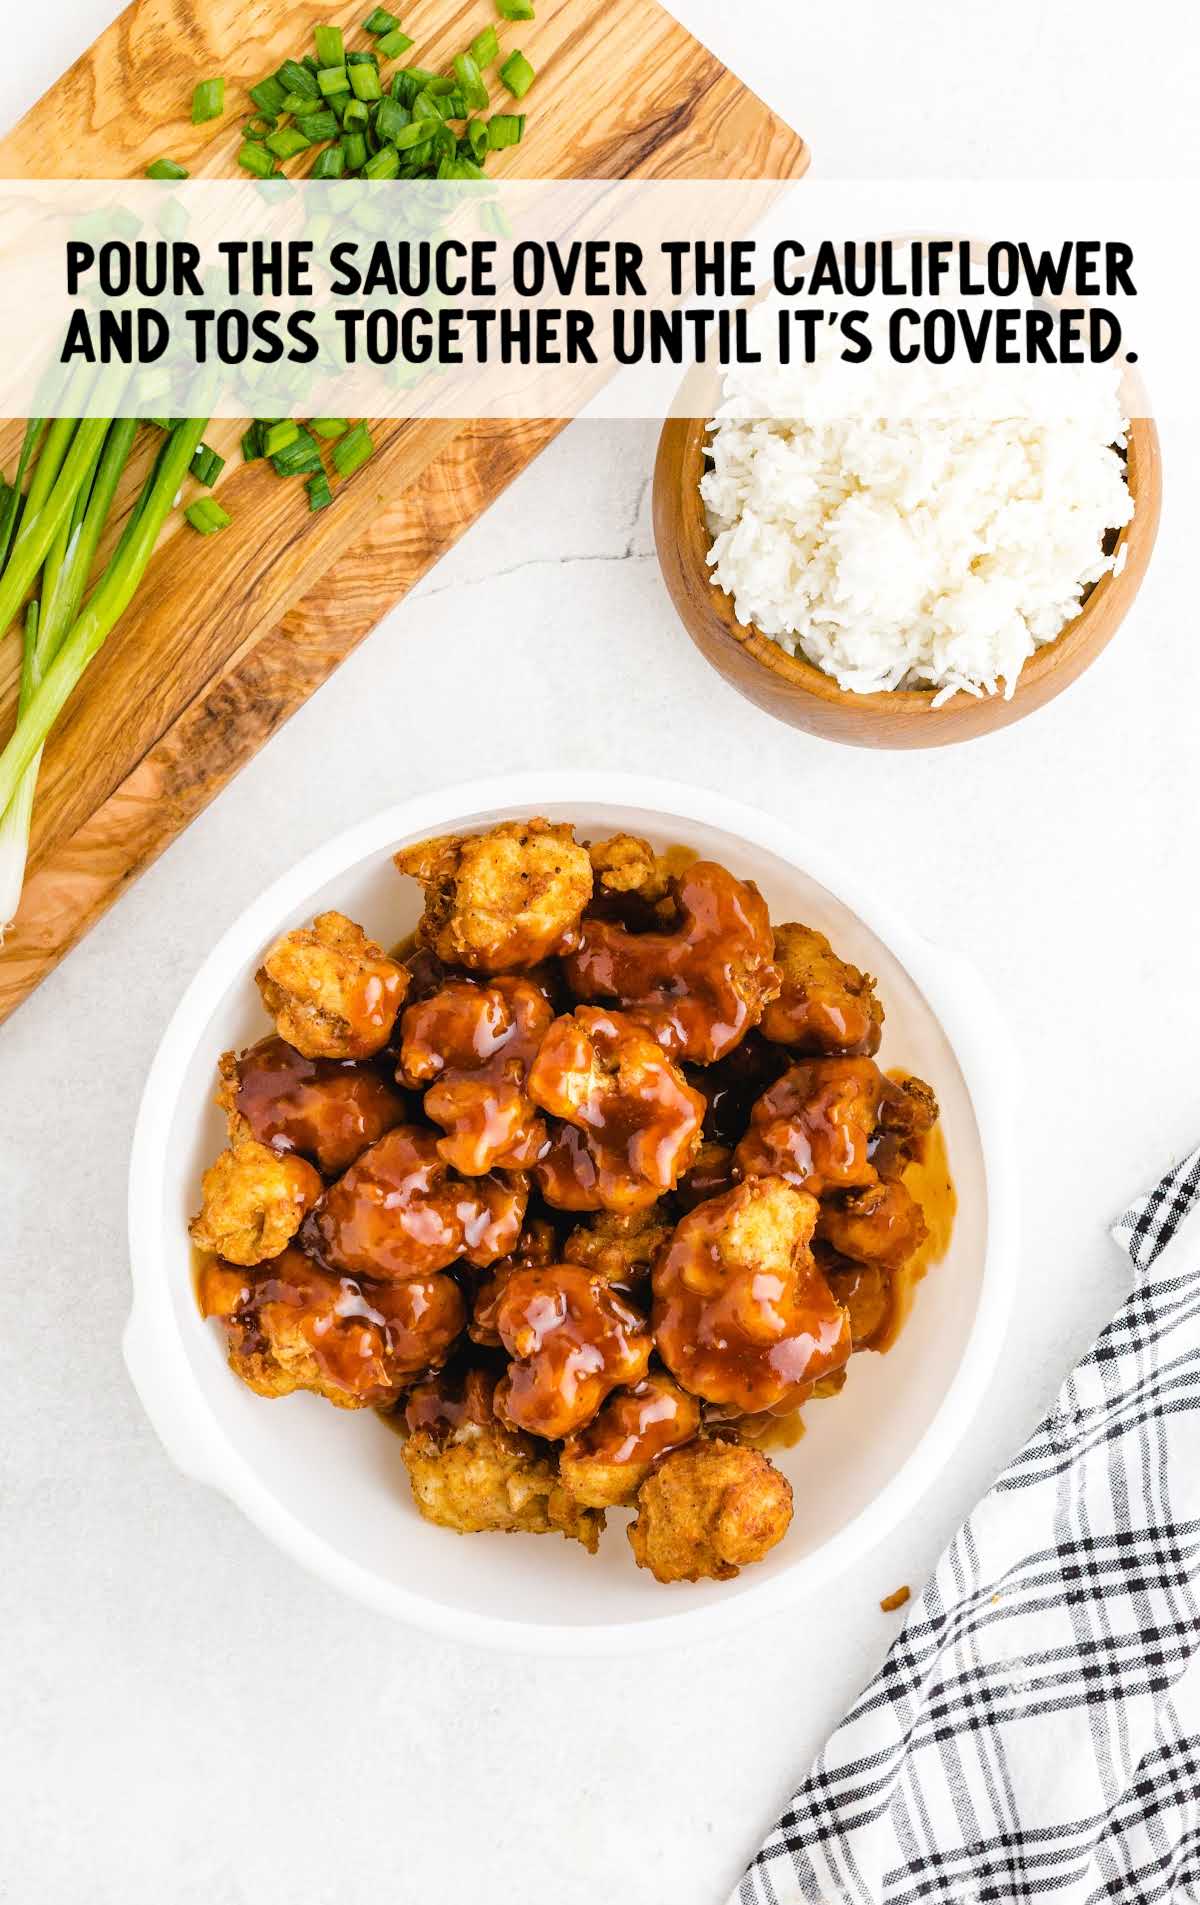 sauce poured on top of fried cauliflower in a bowl